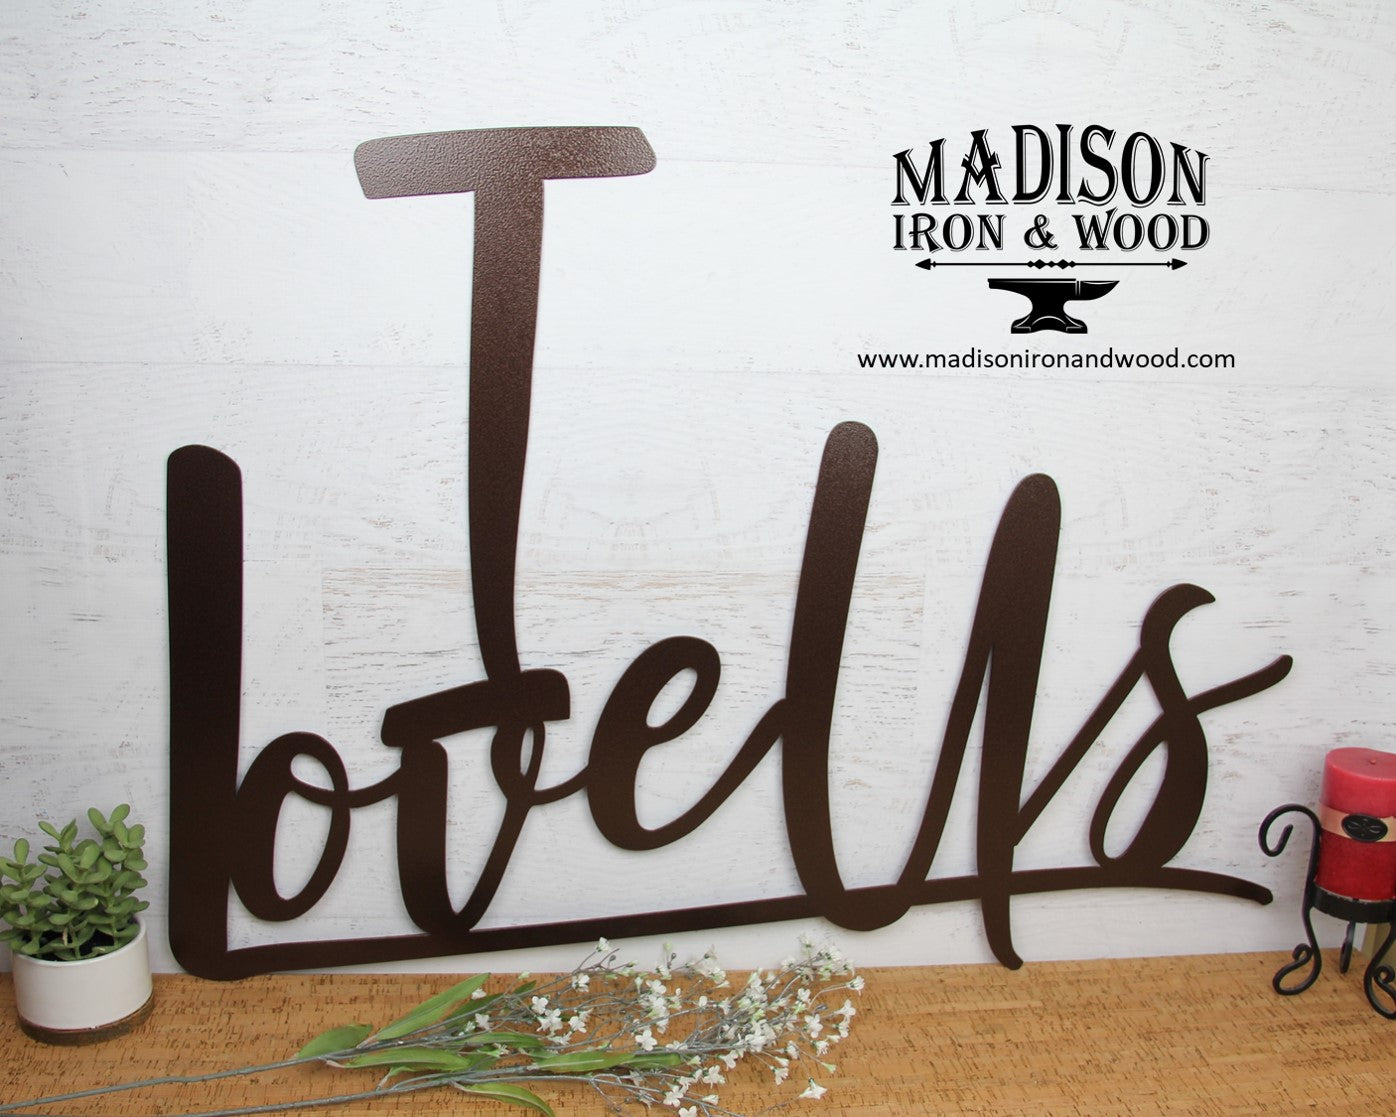 I Love Us Metal Word Sign - Madison Iron and Wood - Wall Art - metal outdoor decor - Steel deocrations - american made products - veteran owned business products - fencing decorations - fencing supplies - custom wall decorations - personalized wall signs - steel - decorative post caps - steel post caps - metal post caps - brackets - structural brackets - home improvement - easter - easter decorations - easter gift - easter yard decor